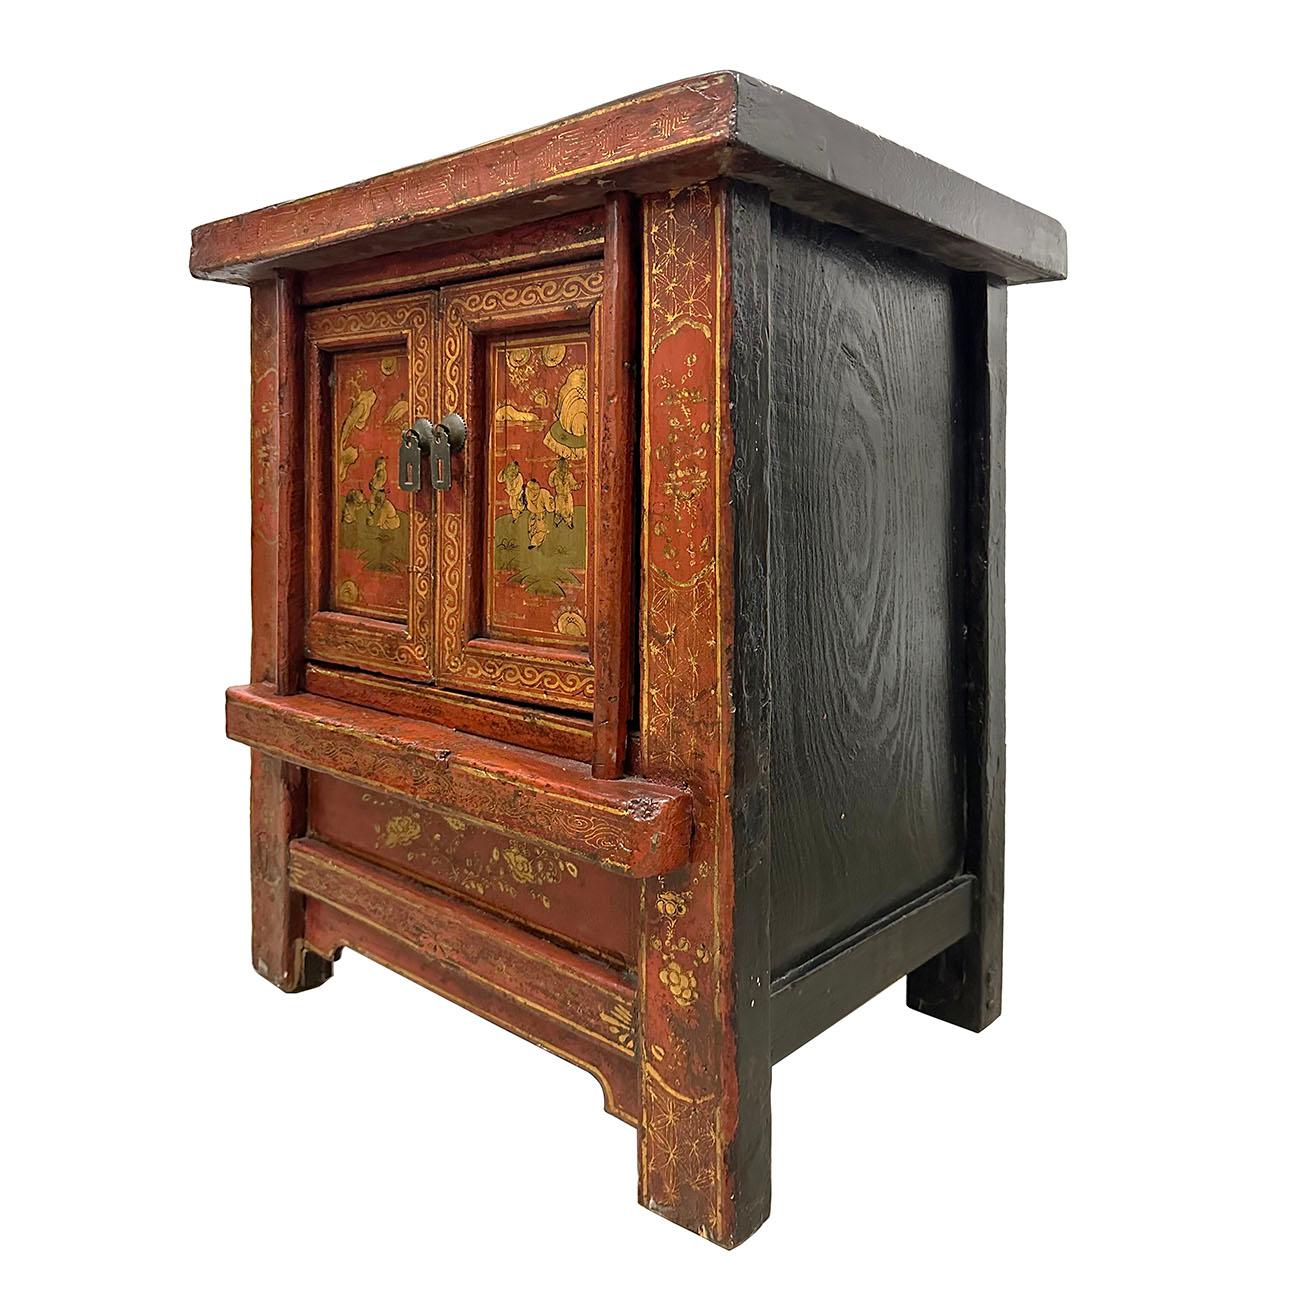 A Chinese late Qing Dynasty period painted wooden bedside cabinet from early 20th century, with two doors, carved apron and folks art painting. Created in China during the late Qing Dynasty in the early 20th century, this wooden bedside cabinet